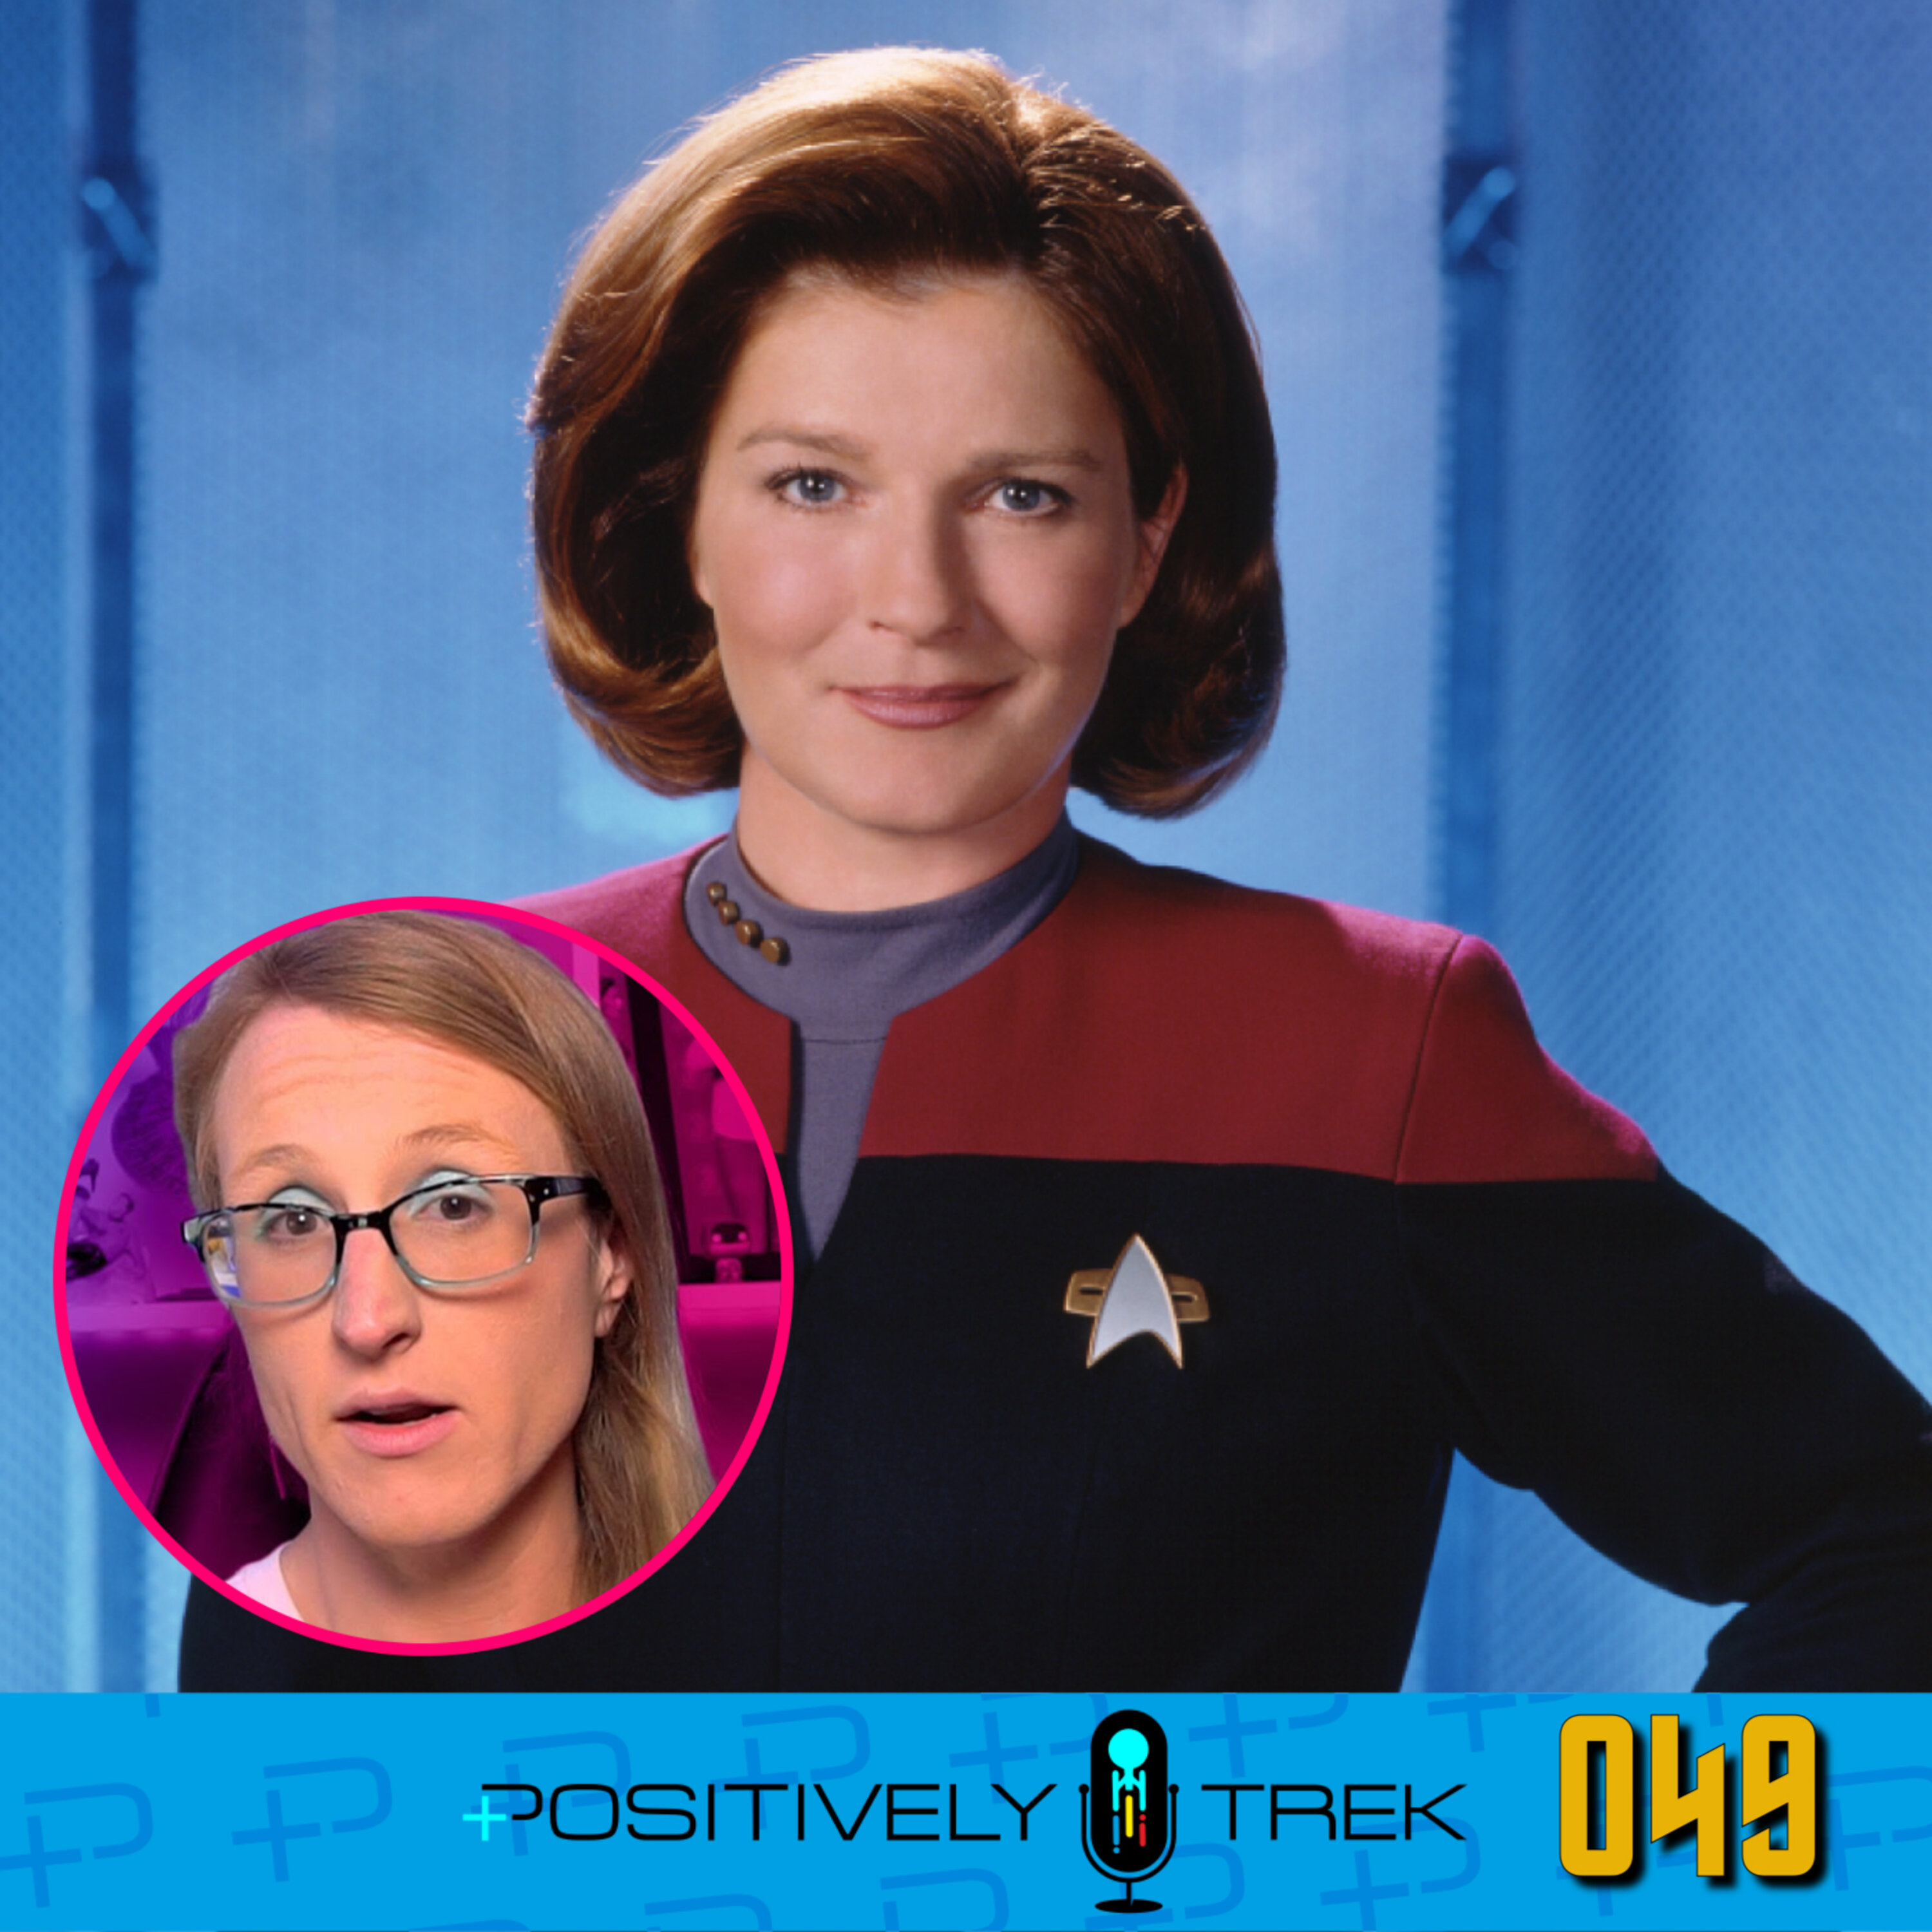 Janeway is Back!